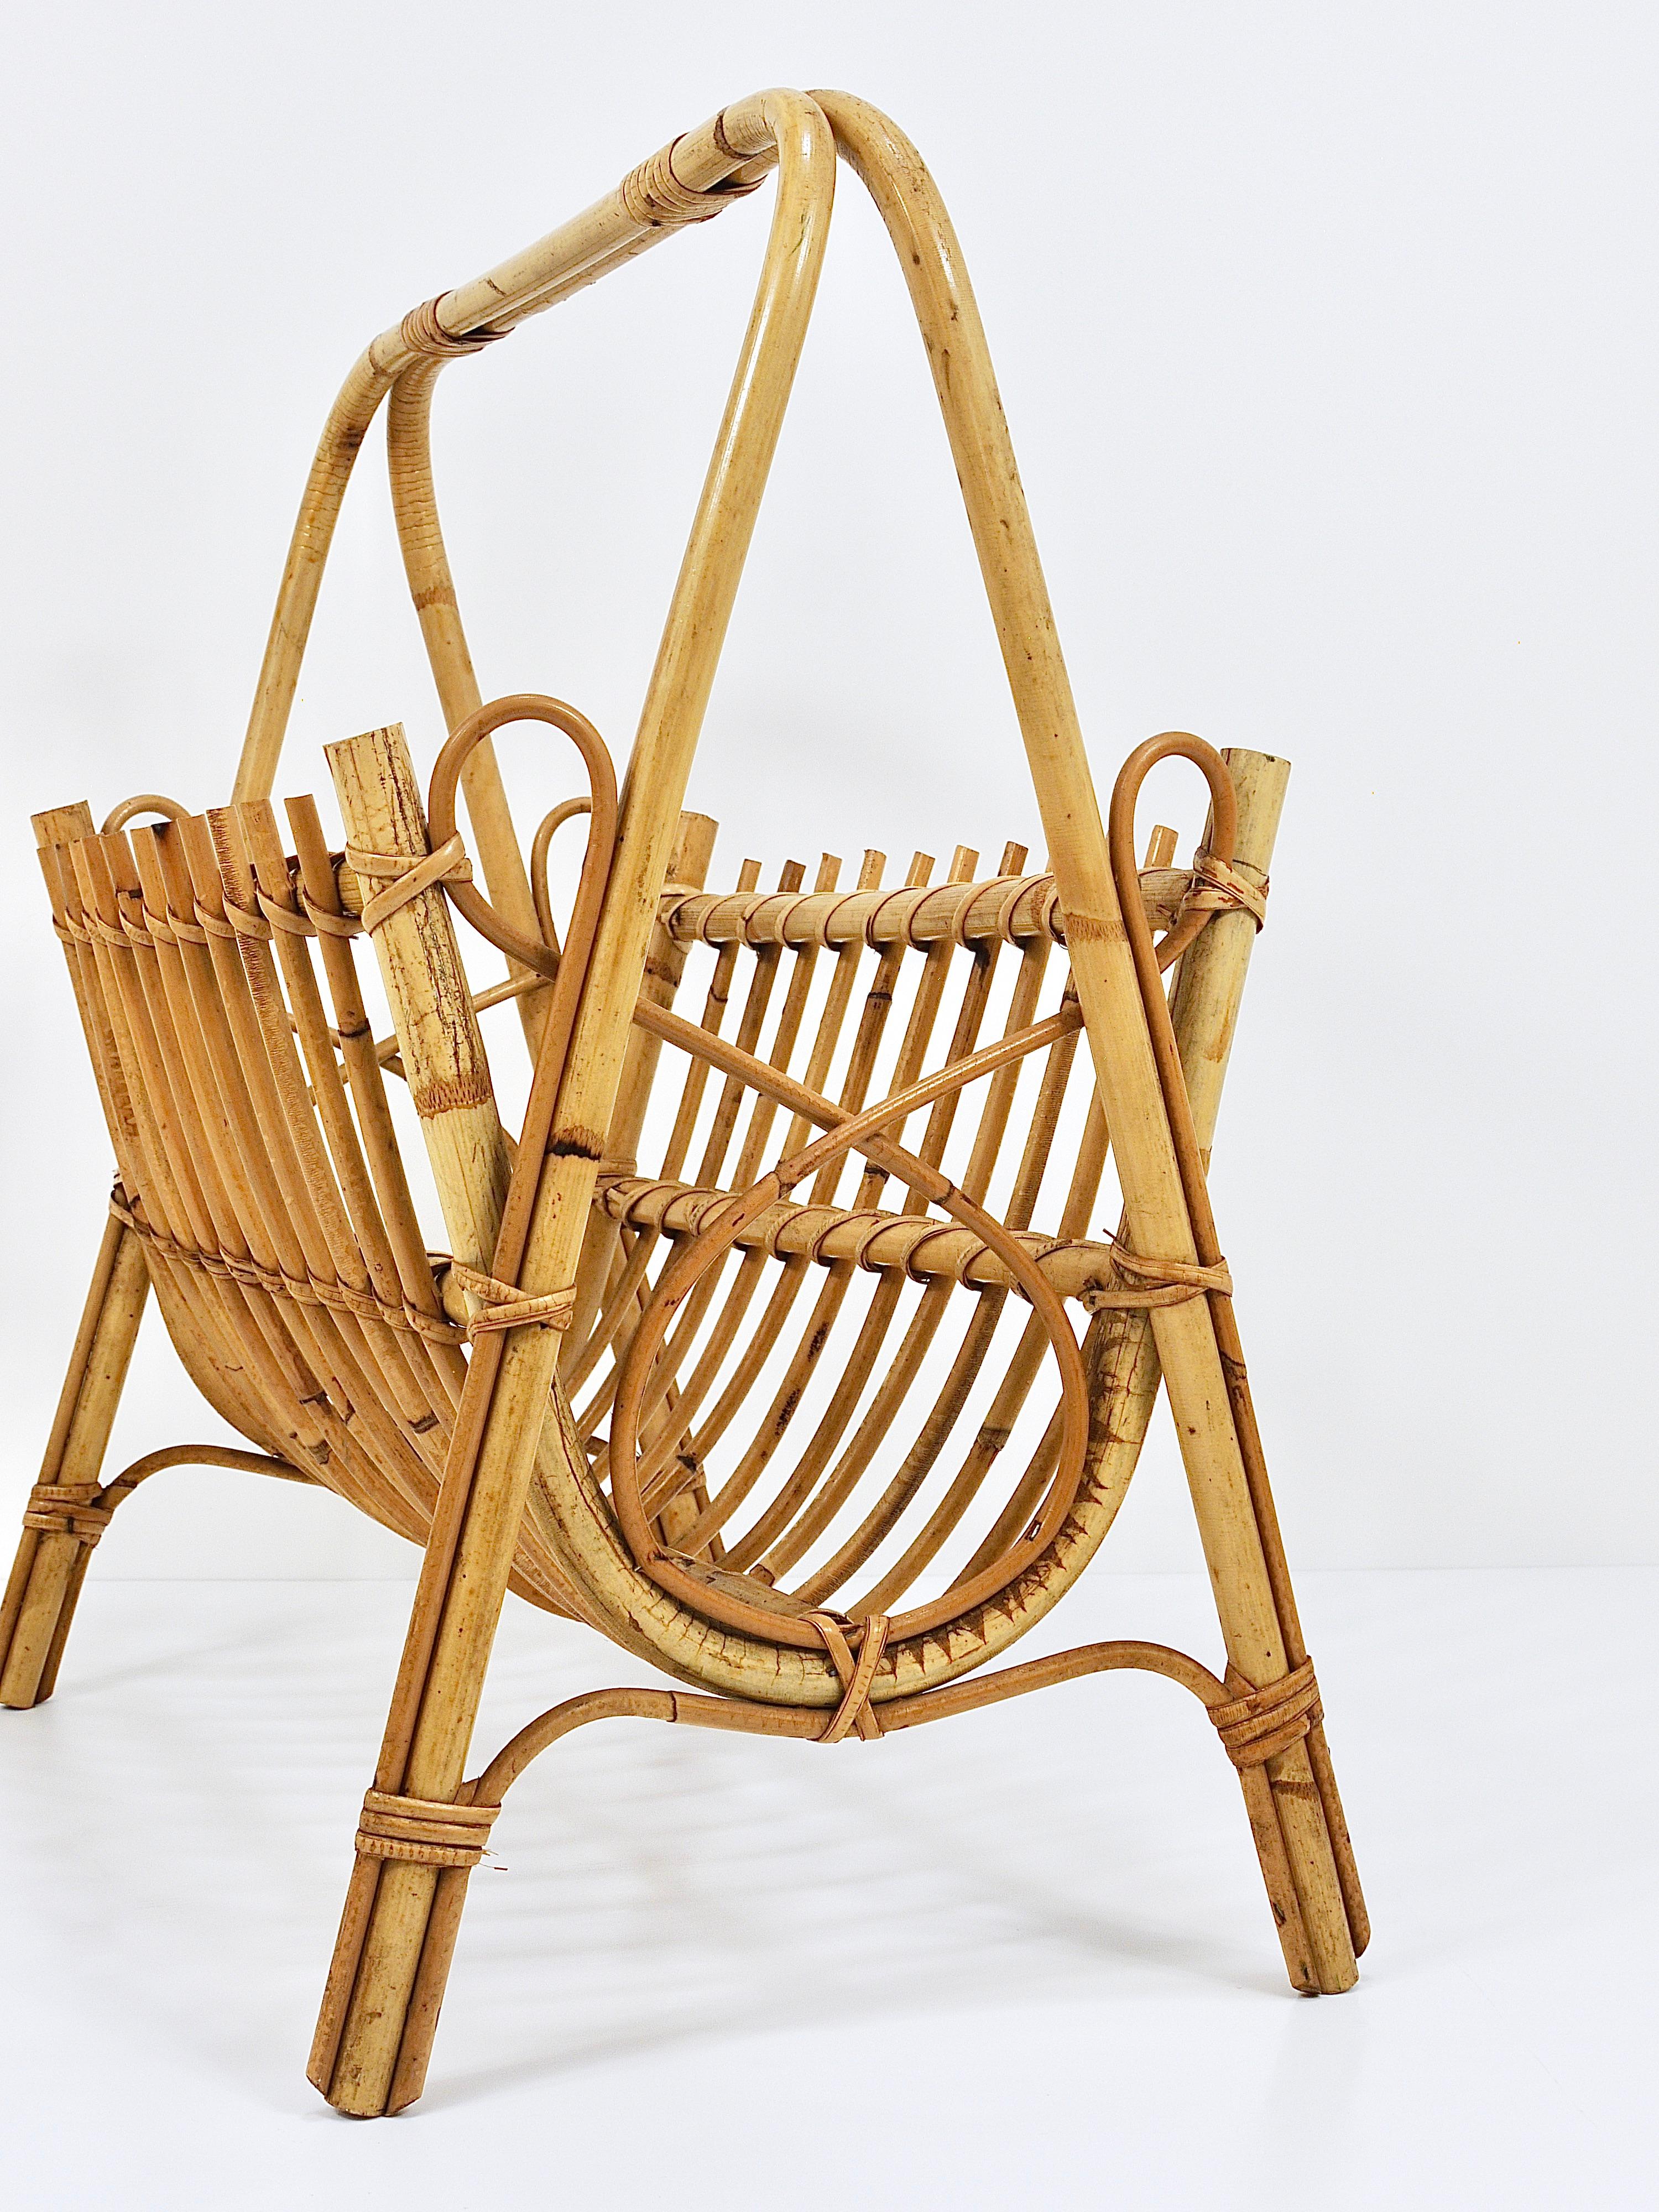 Franco Albini Style Rattan Bamboo Magazine Rack Newspaper Stand, France, 1950s For Sale 3